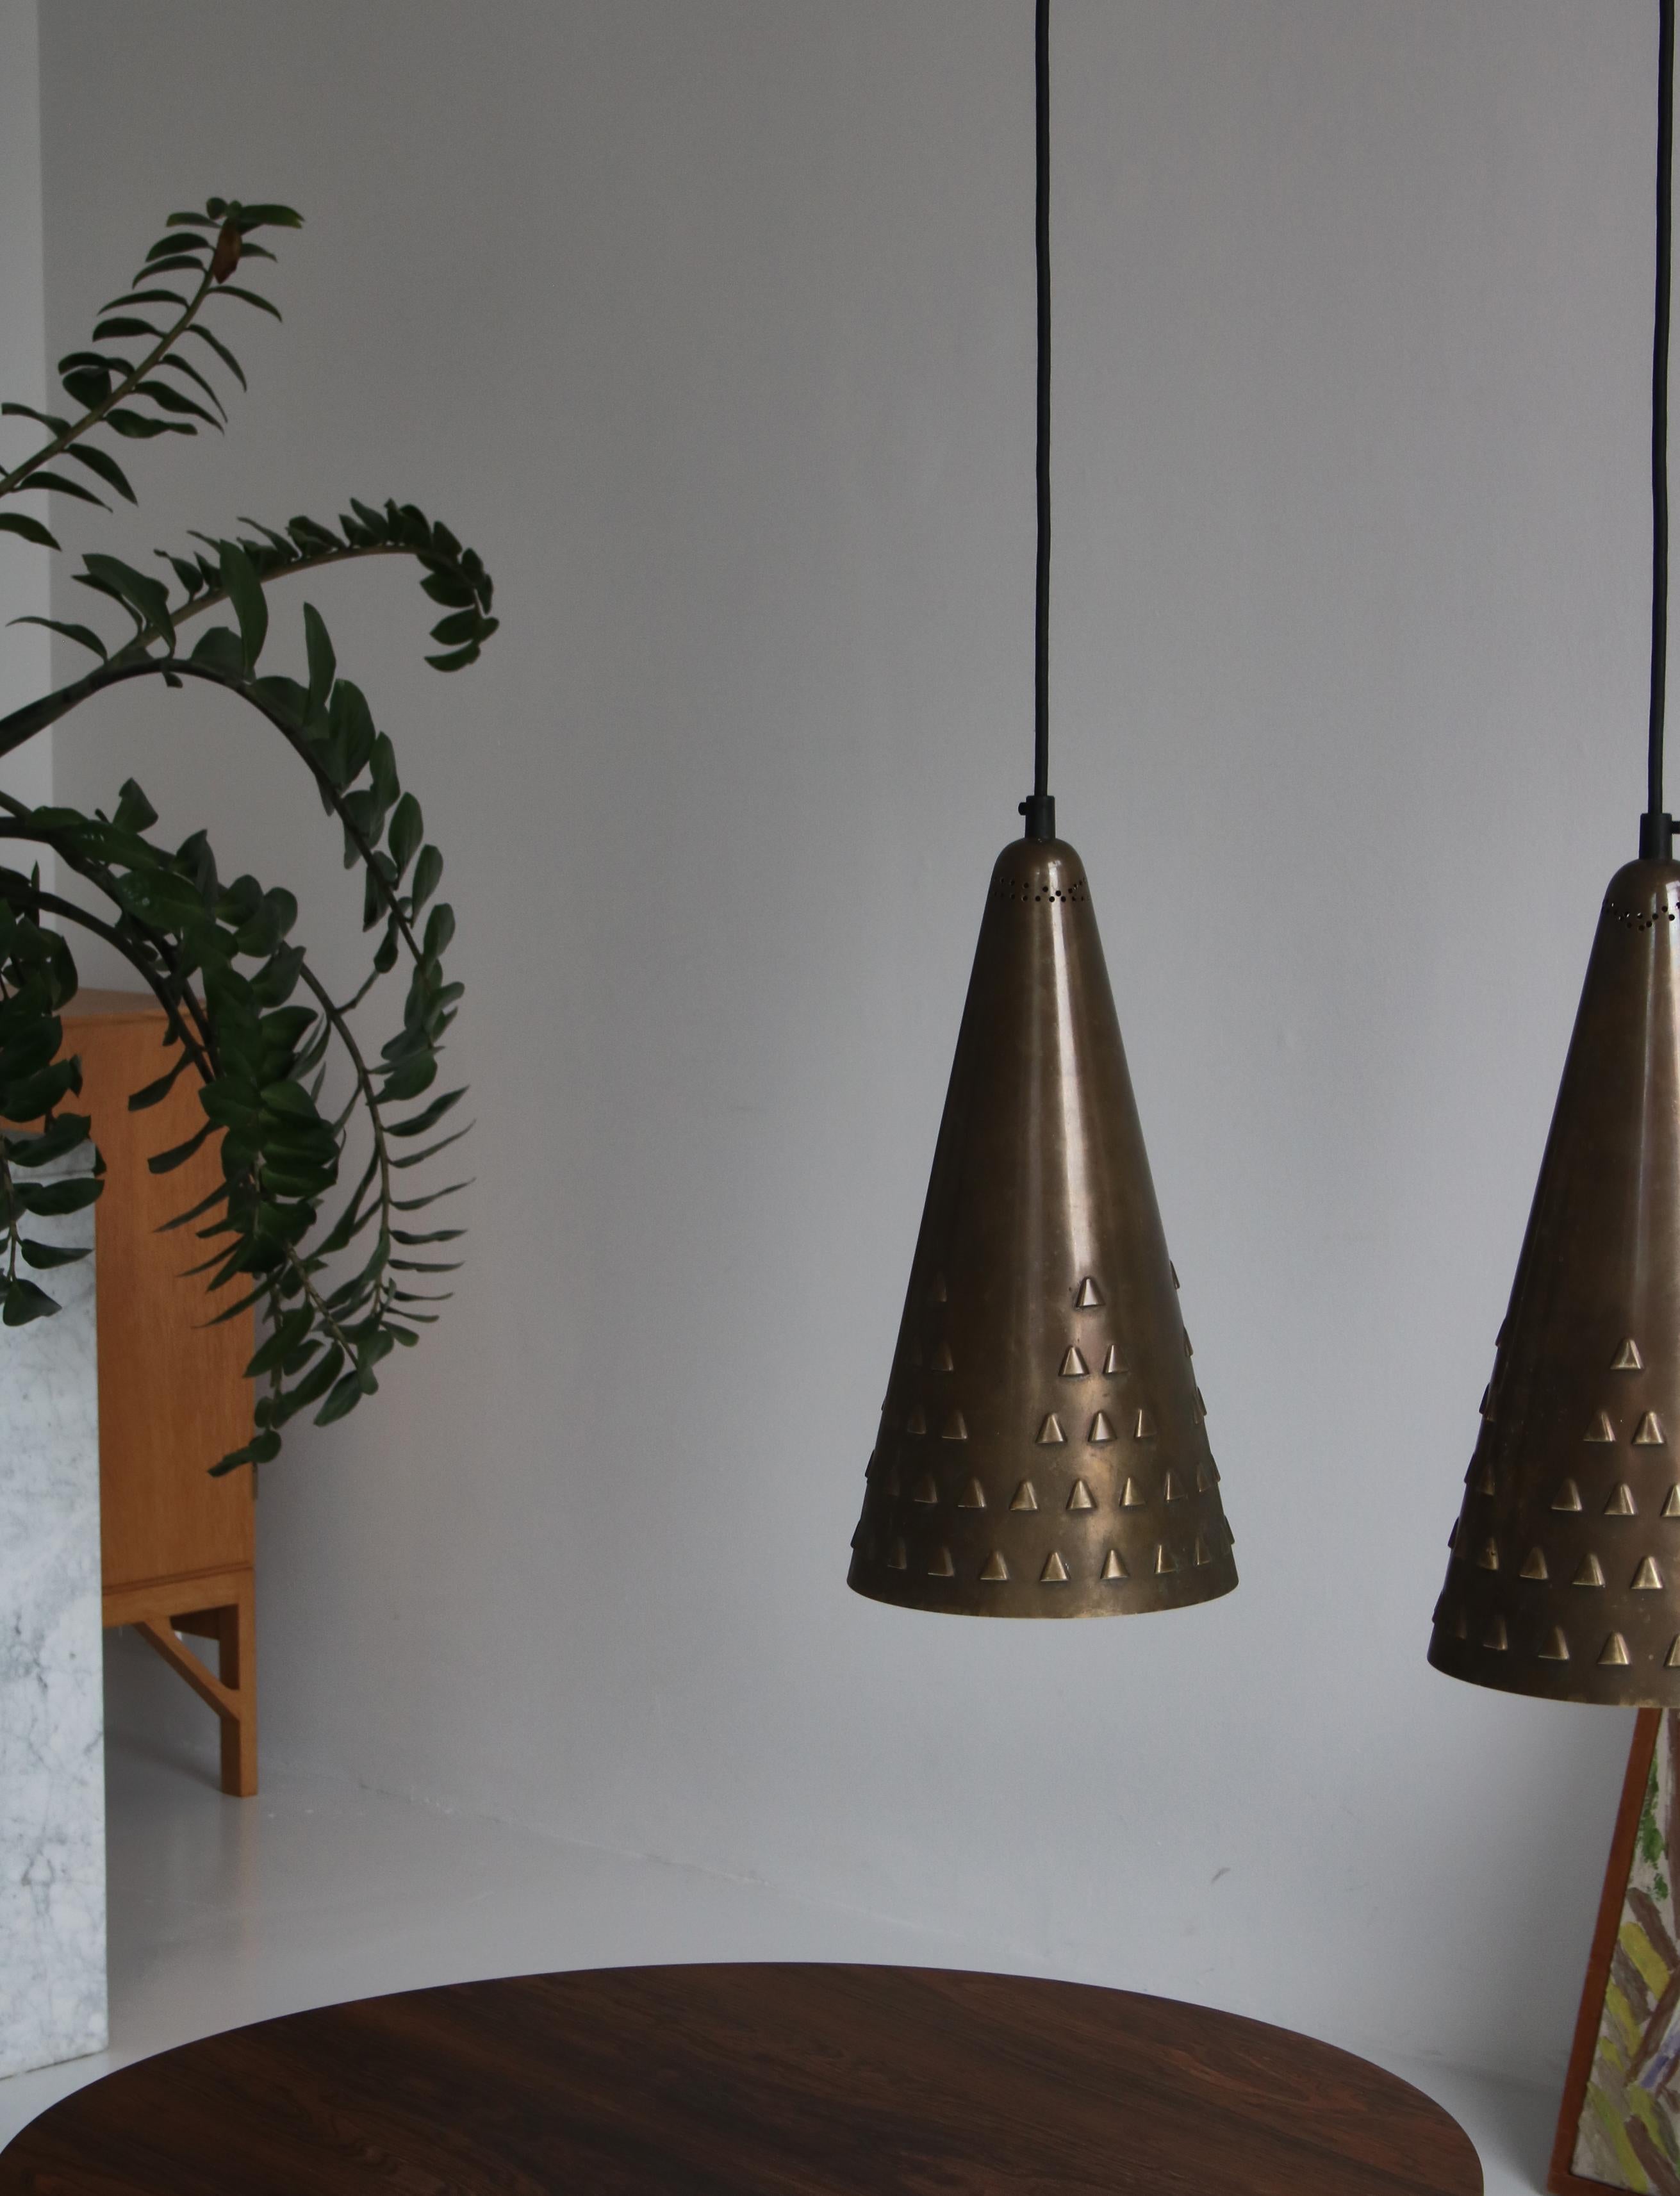 Pair of large brass pendants by Danish designer Brockmann-Petersen made for his stand at the Cabinetmakers Guild Exhibition in 1953. The large cone shaped shades are made from solid brass and are white lacquered on the inside. Both lamps have a nice